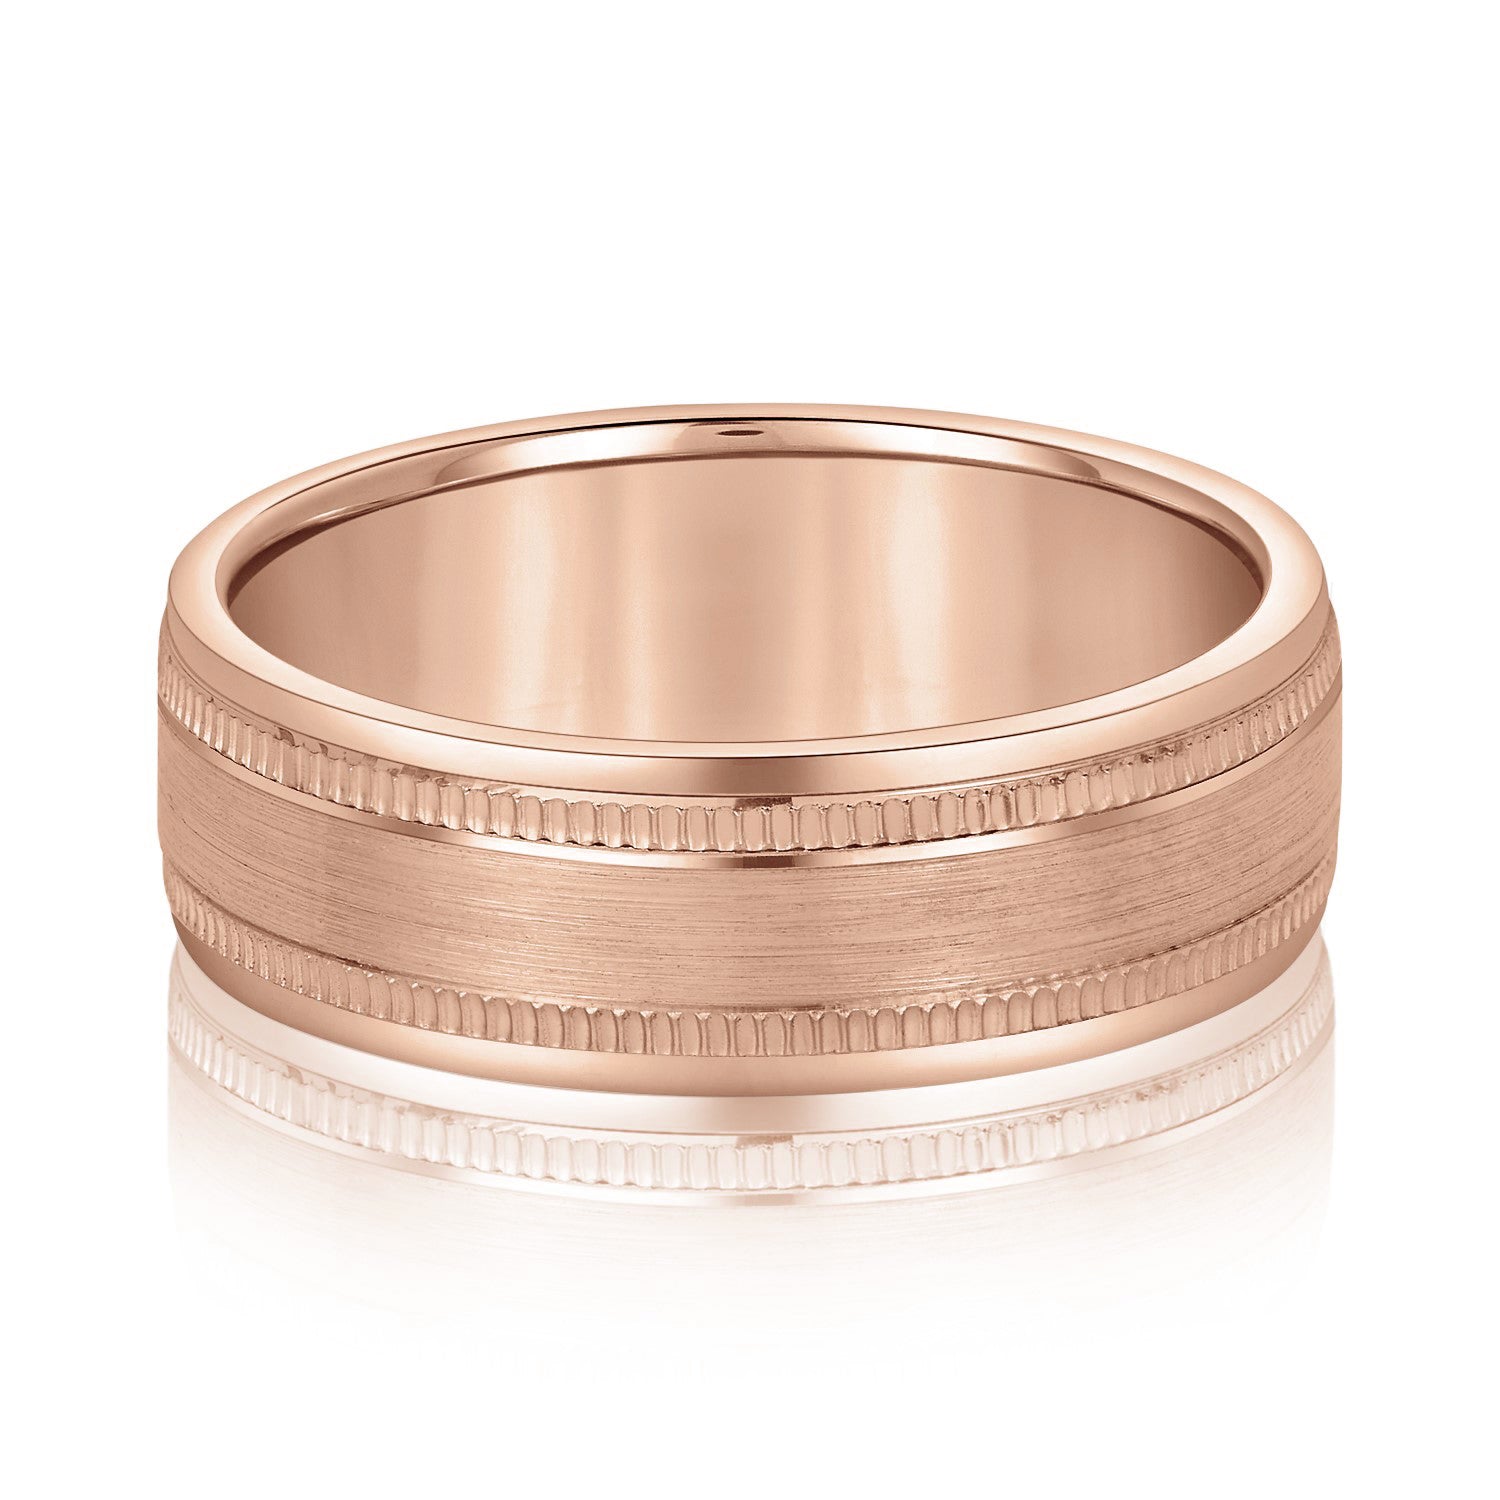 Men's Center Brushed Double Grooved Wedding Band